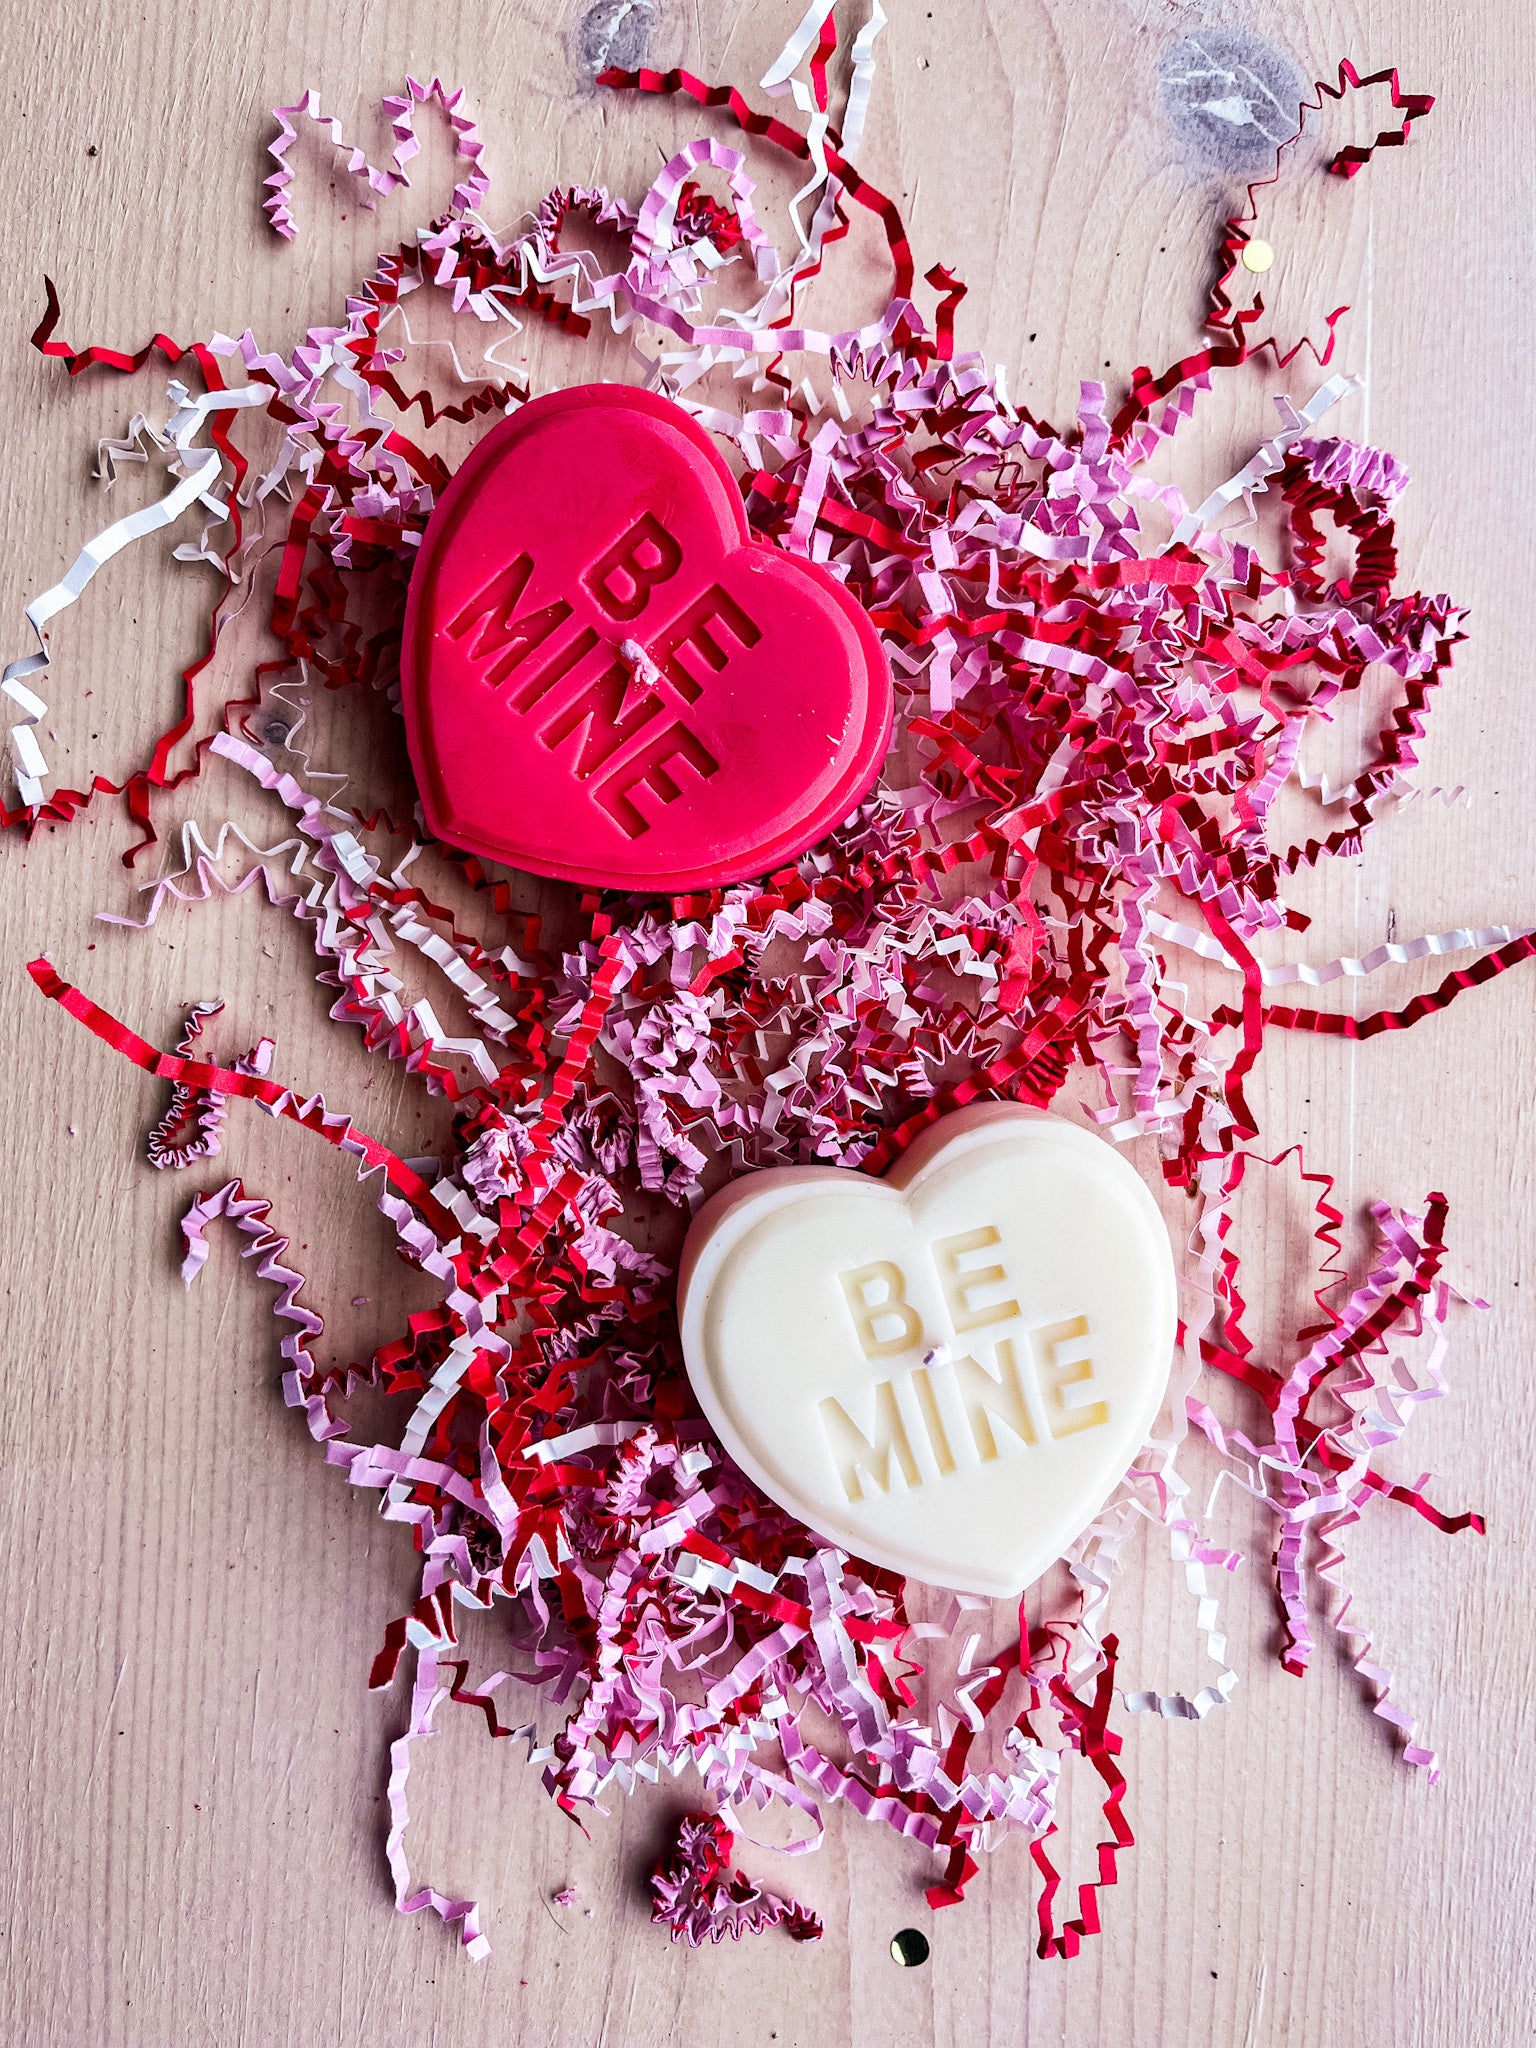 Decorative "Be Mine" candle